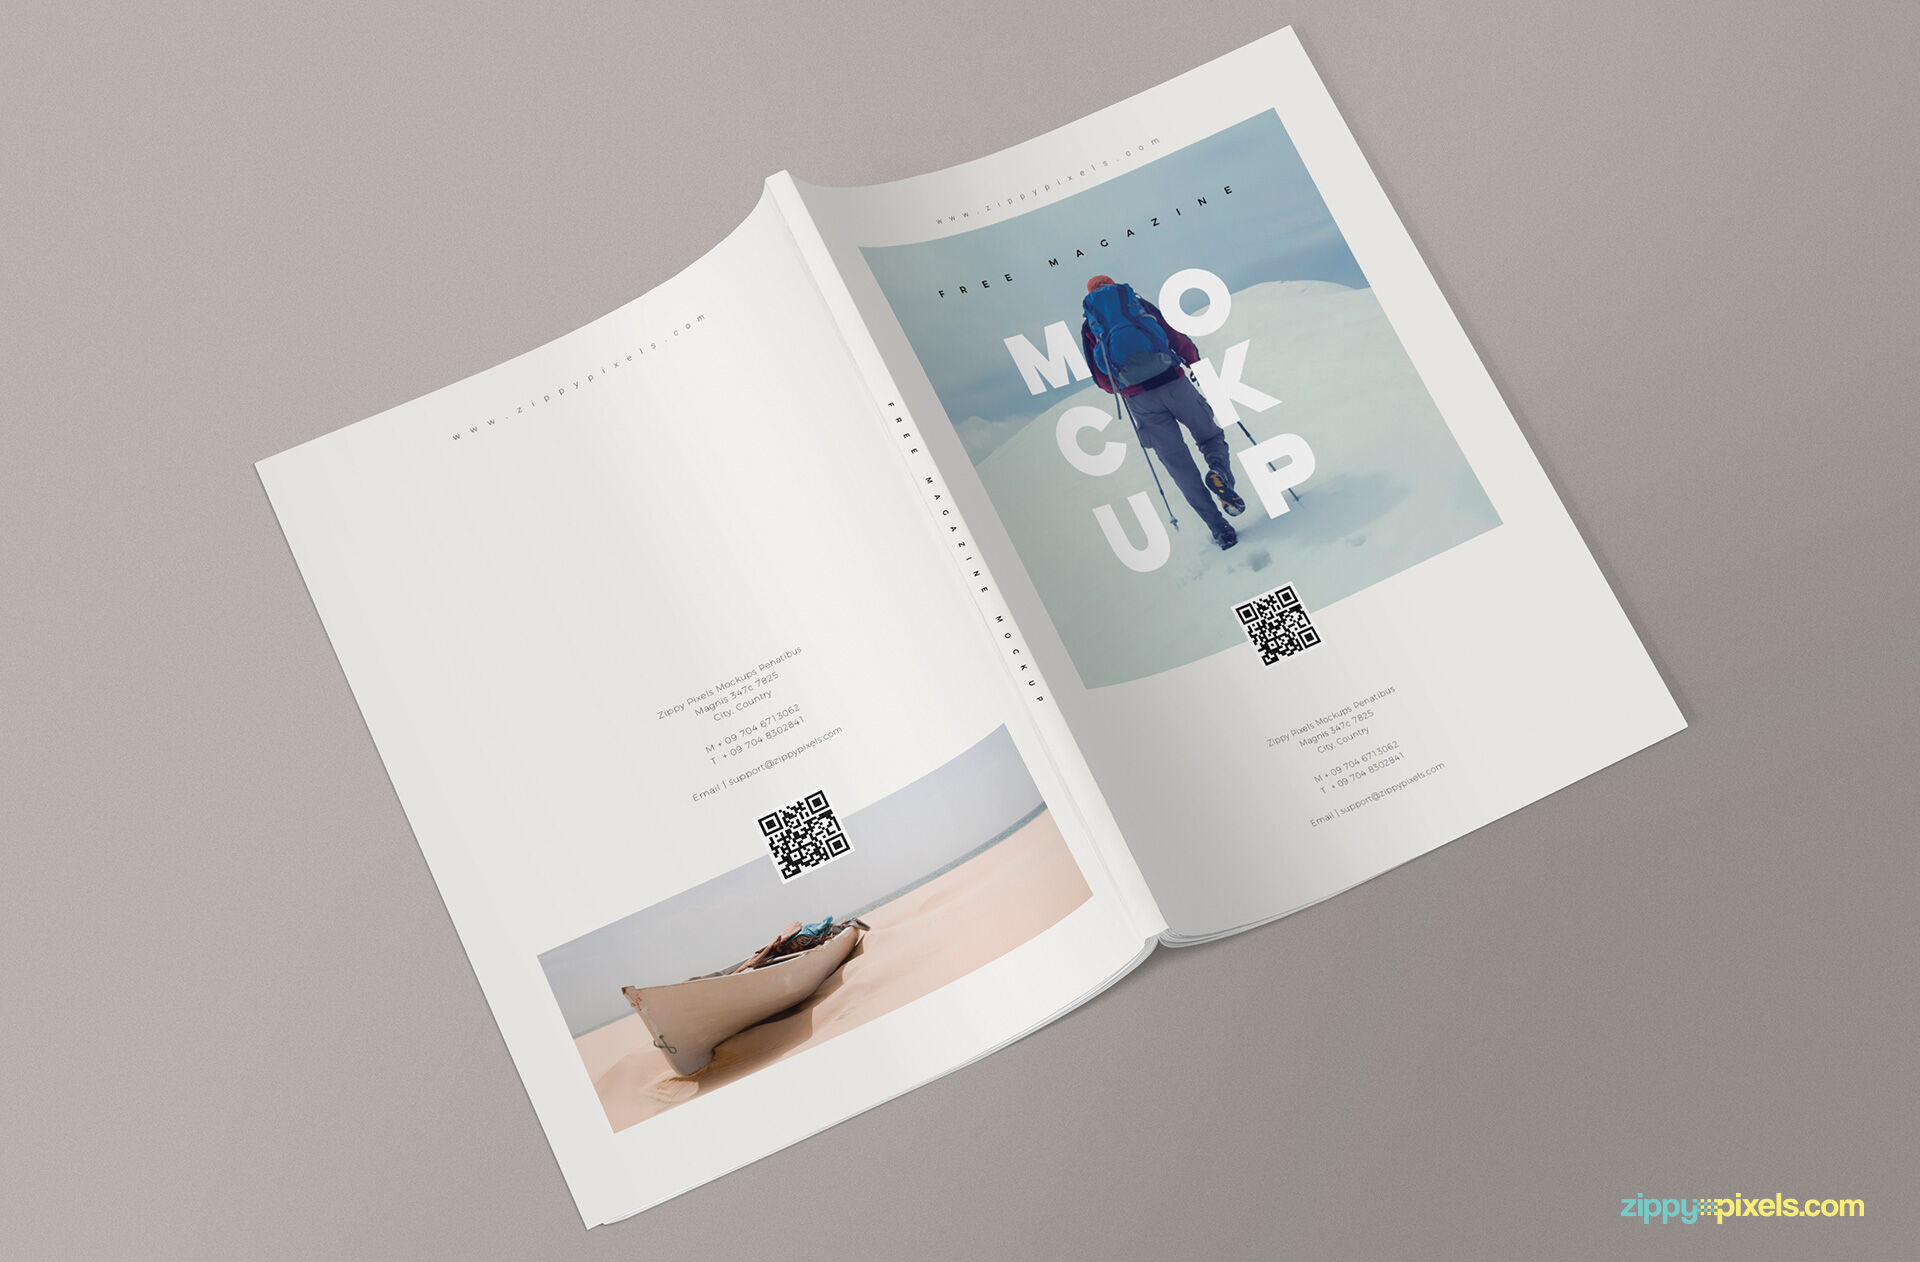 Three Mockups Showing US Letter Size Magazines' Inner Pages and Covers FREE PSD